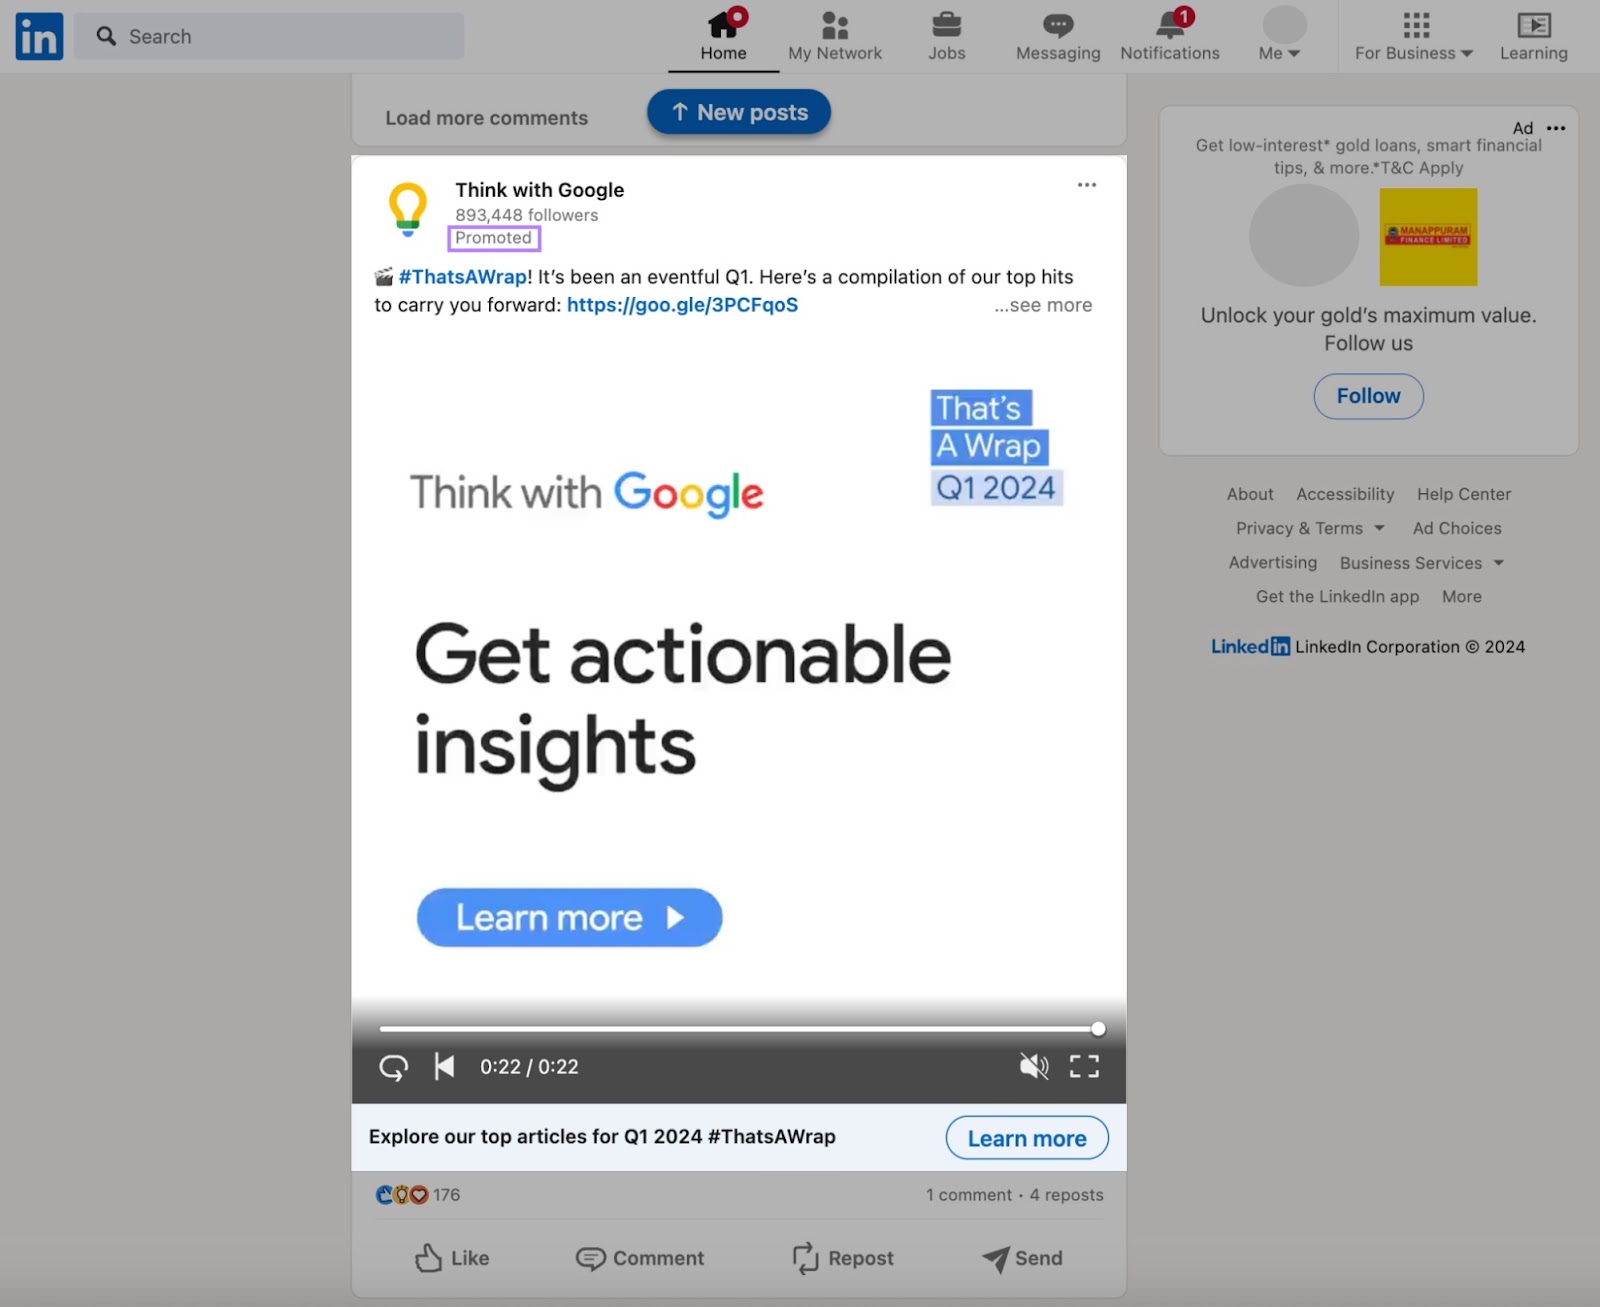 Think with Google's promoted post on LinkedIn